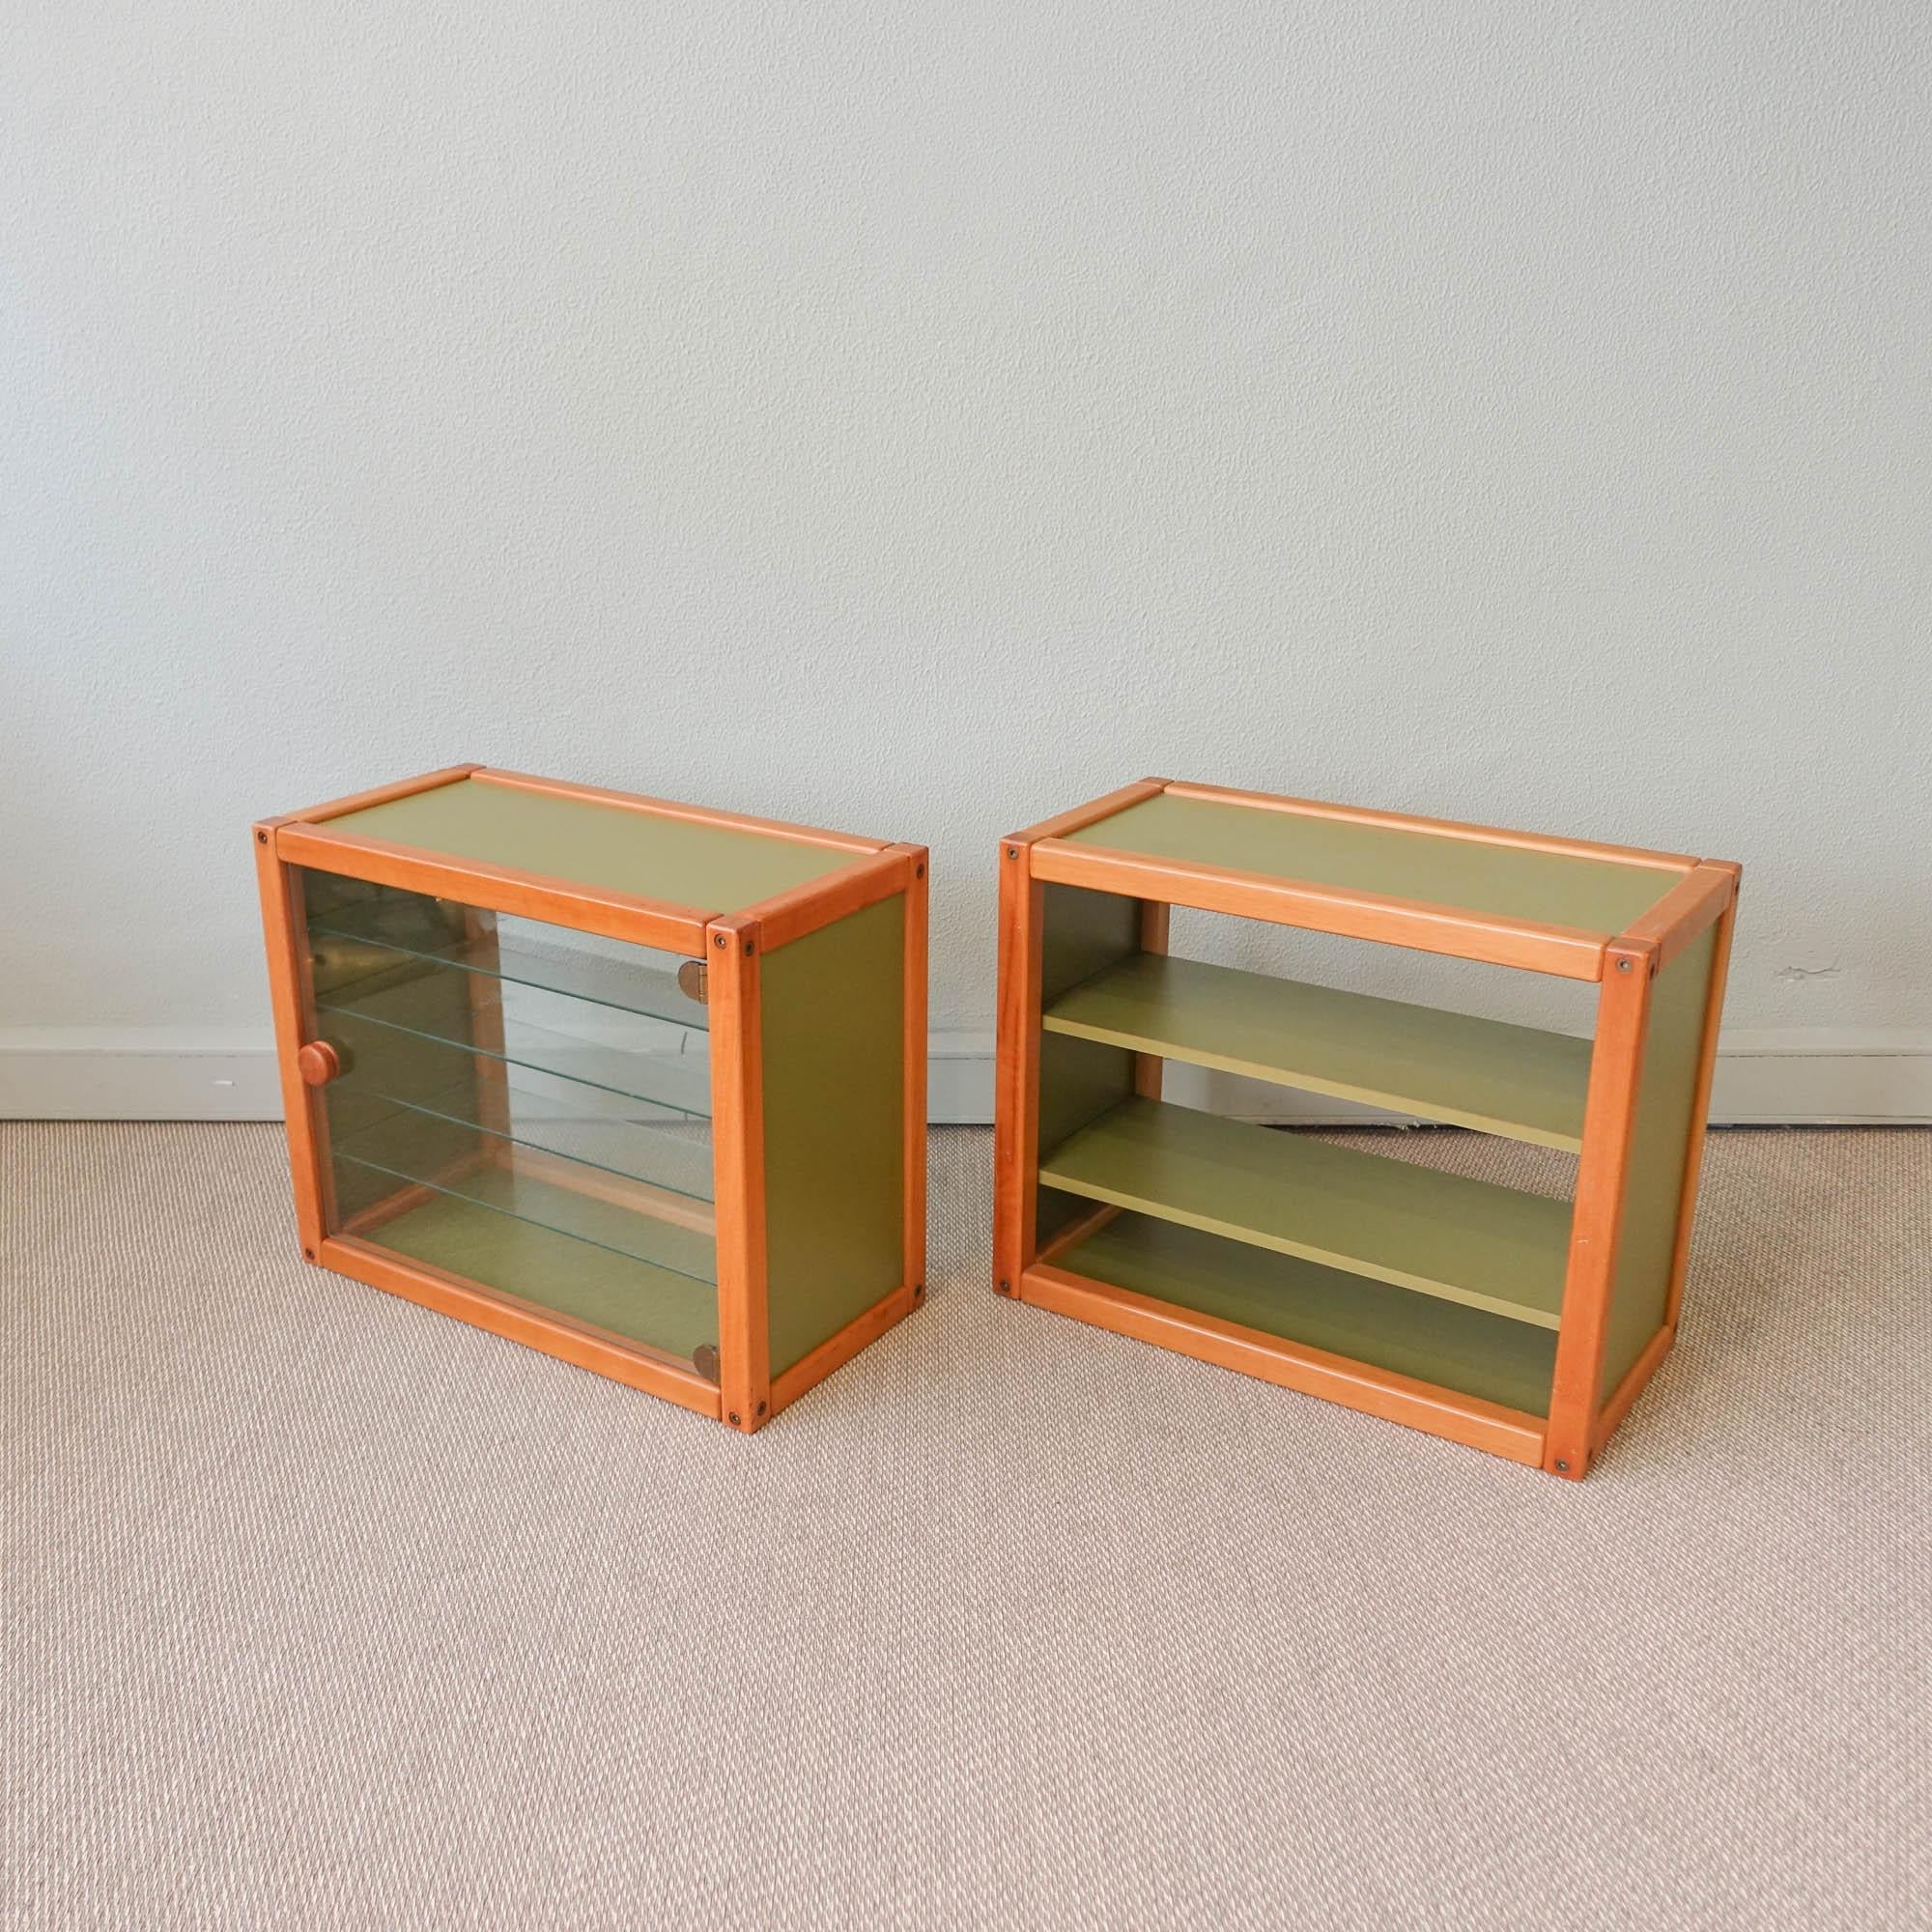 German Pair of Vintage Profilsystem Collection Glass Storage Units by Elmar Flötotto For Sale